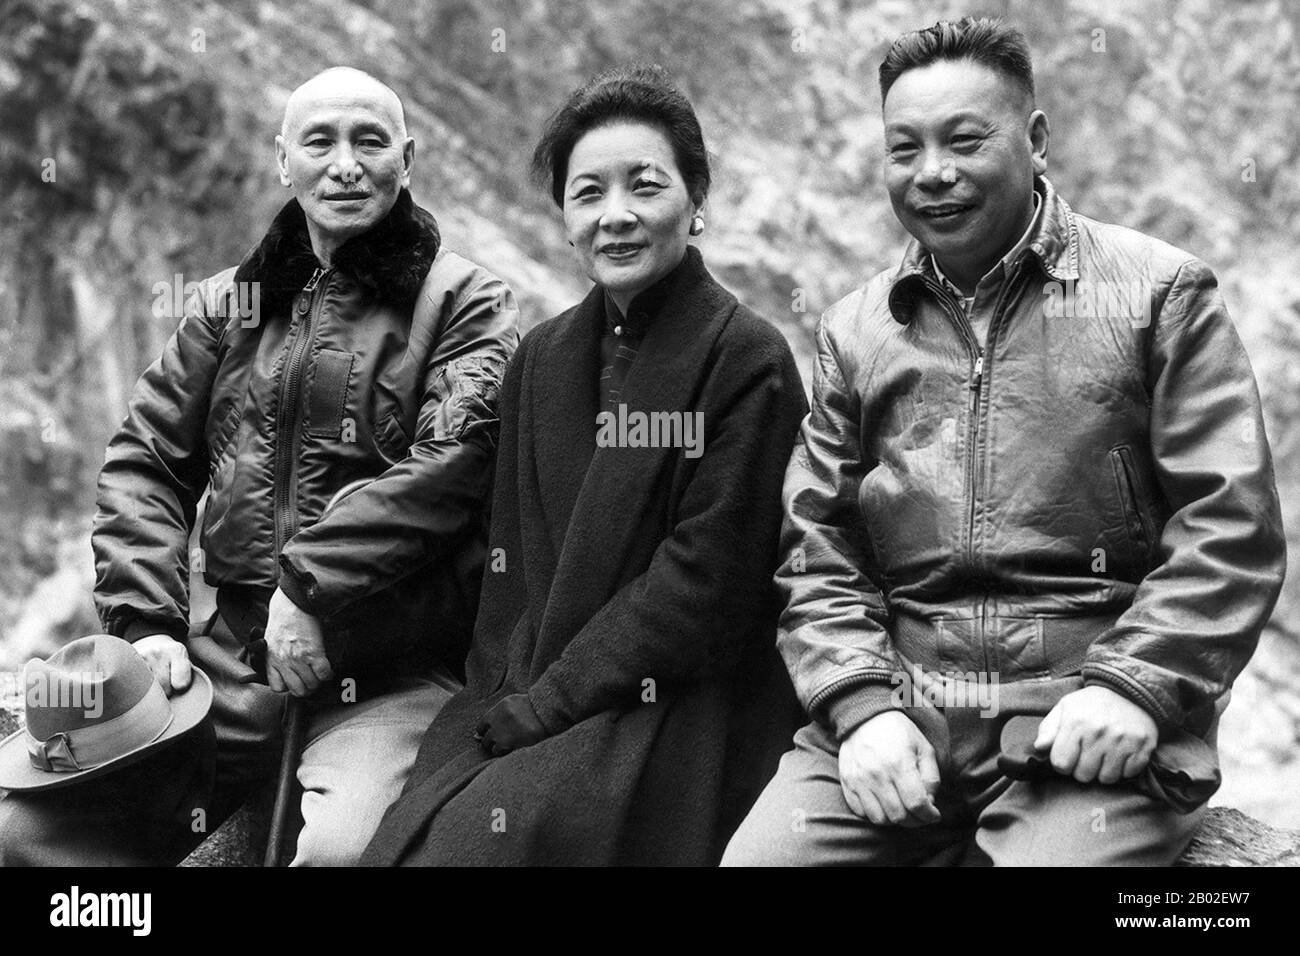 Chiang Ching-kuo (蔣經國) (April 27,1 1910 – January 13, 1988), Kuomintang (KMT) politician and leader, was the son of Generalissimo and President Chiang Kai-shek and held numerous posts in the government of the Republic of China (ROC).  He succeeded his father to serve as Premier of the Republic of China between 1972 and 1978, and was the President of the Republic of China from 1978 until his death in 1988. Under his tenure, the government of the Republic of China, while authoritarian, became more open and tolerant of political dissent.  Towards the end of his life, Chiang relaxed government con Stock Photo